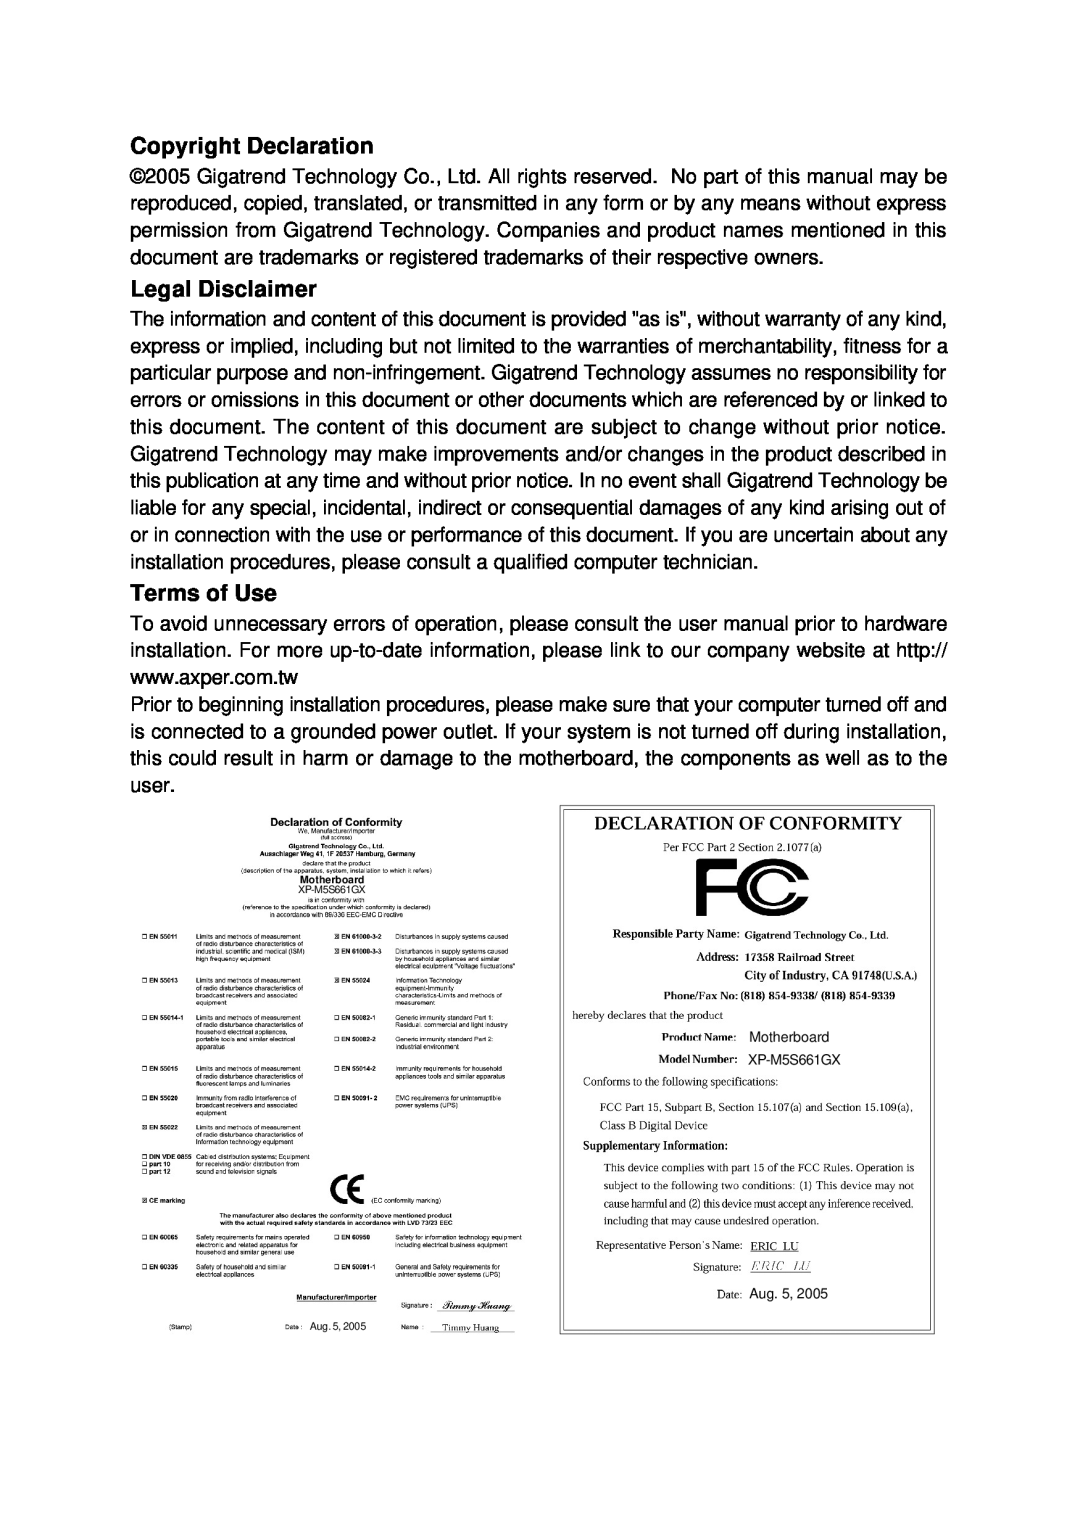 Intel user manual Copyright Declaration, Legal Disclaimer, Terms of Use, Motherboard XP-M5S661GX Aug 